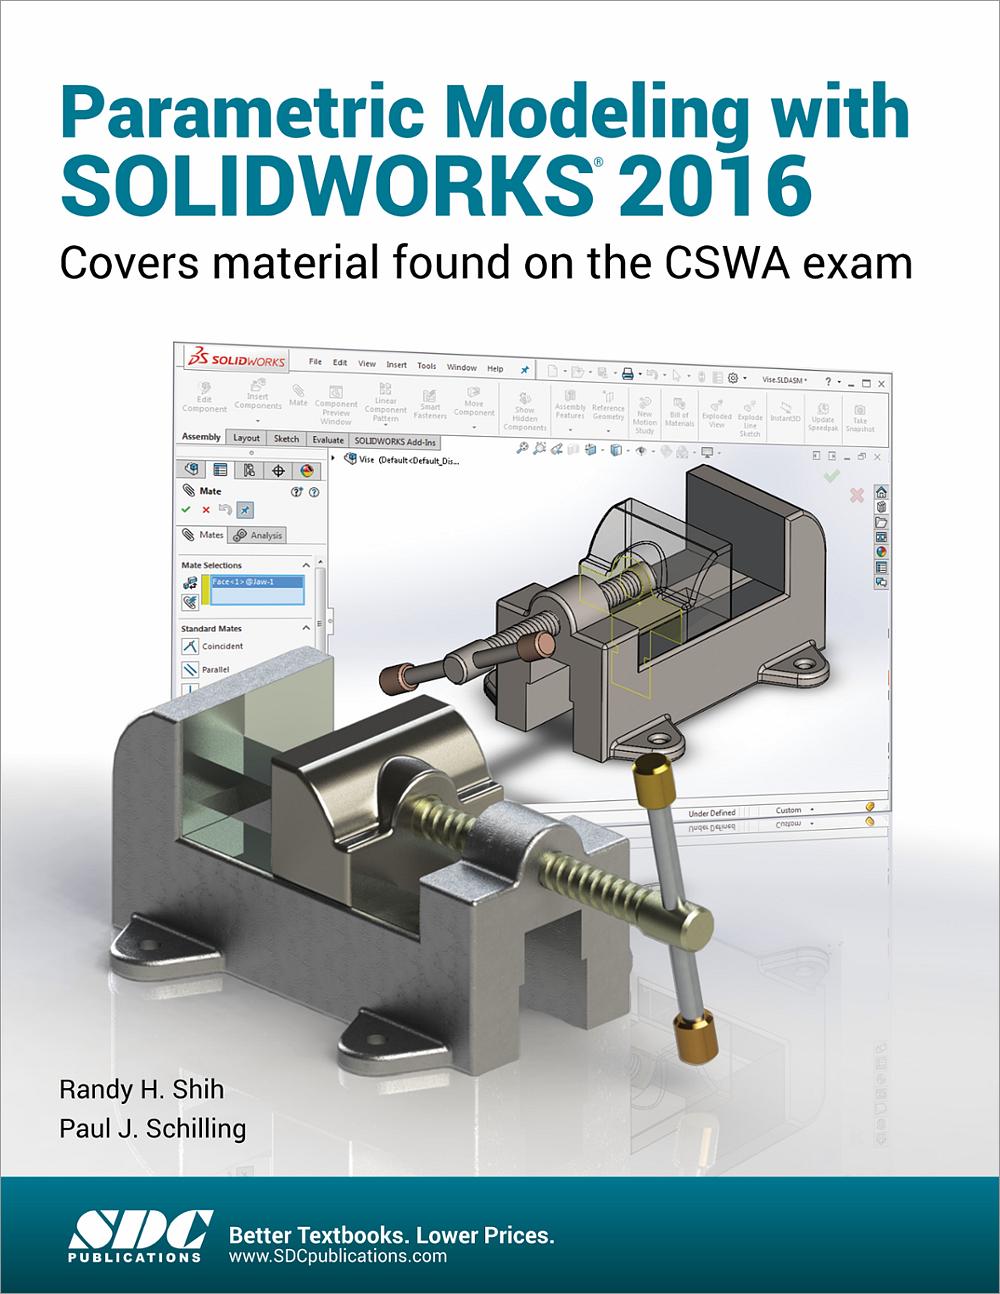 parametric modeling with solidworks 2015 pdf download